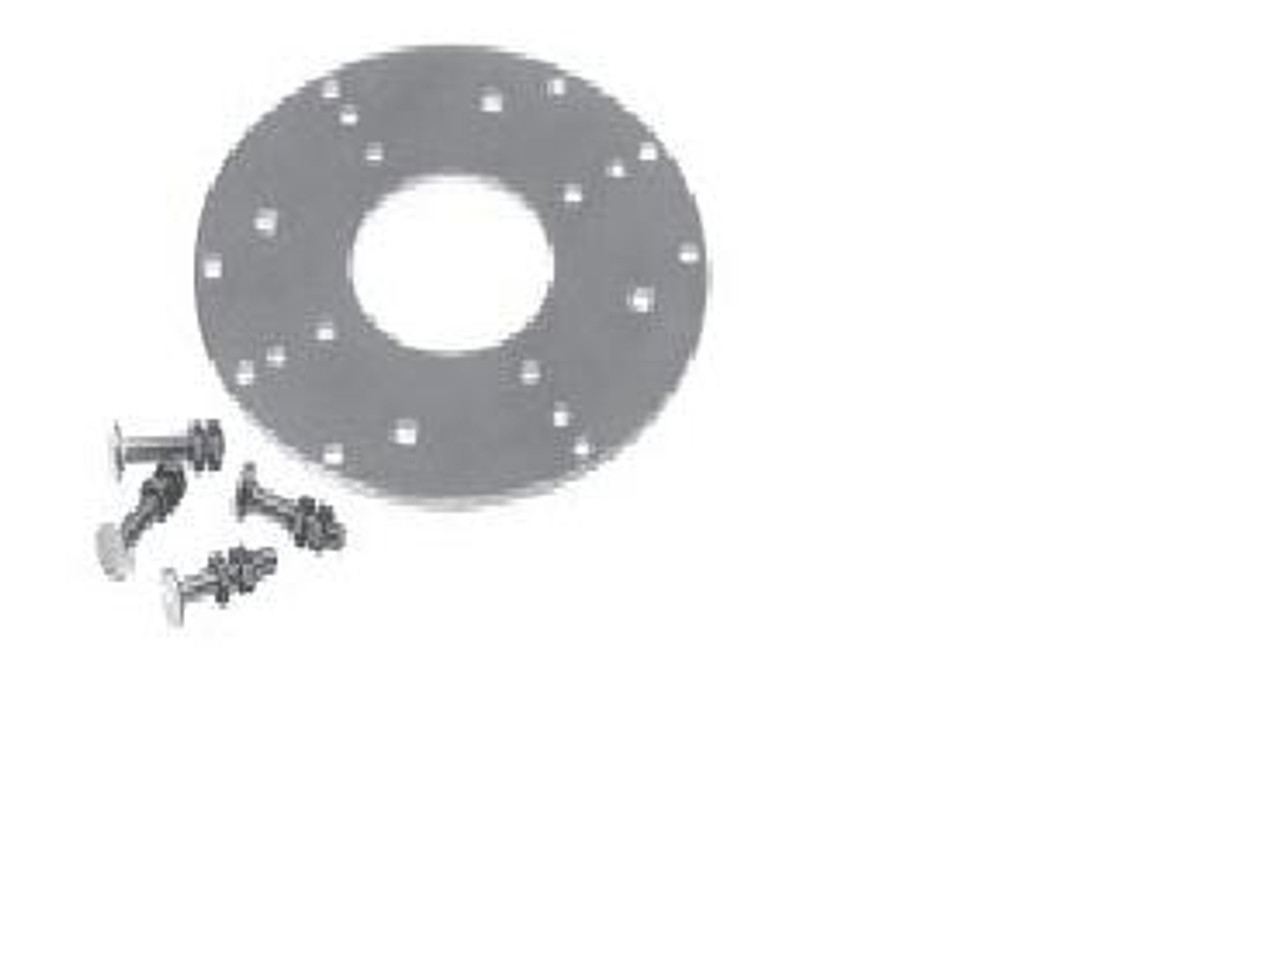 KIT 205 Adapter Plate